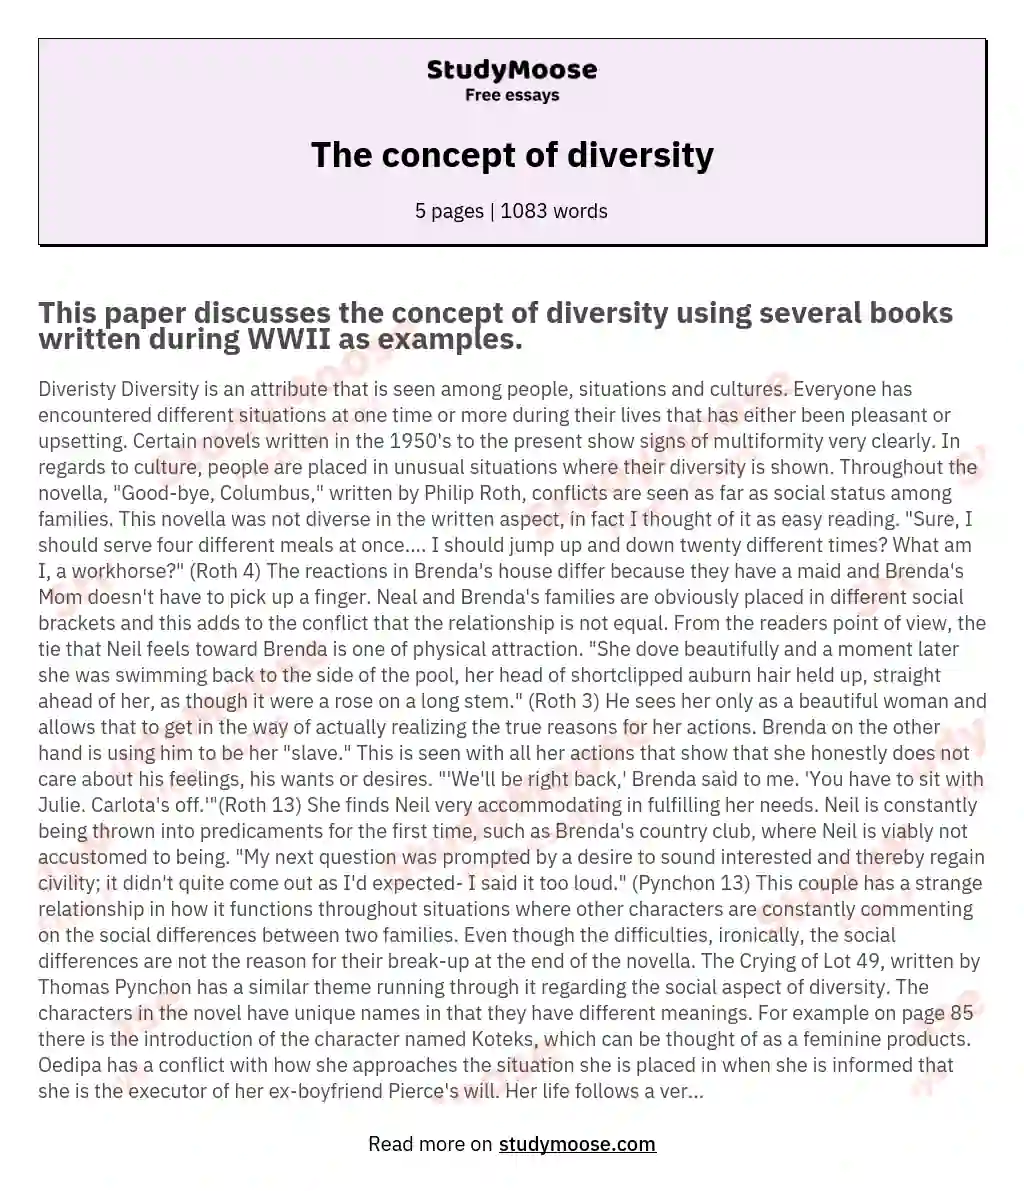 The concept of diversity essay